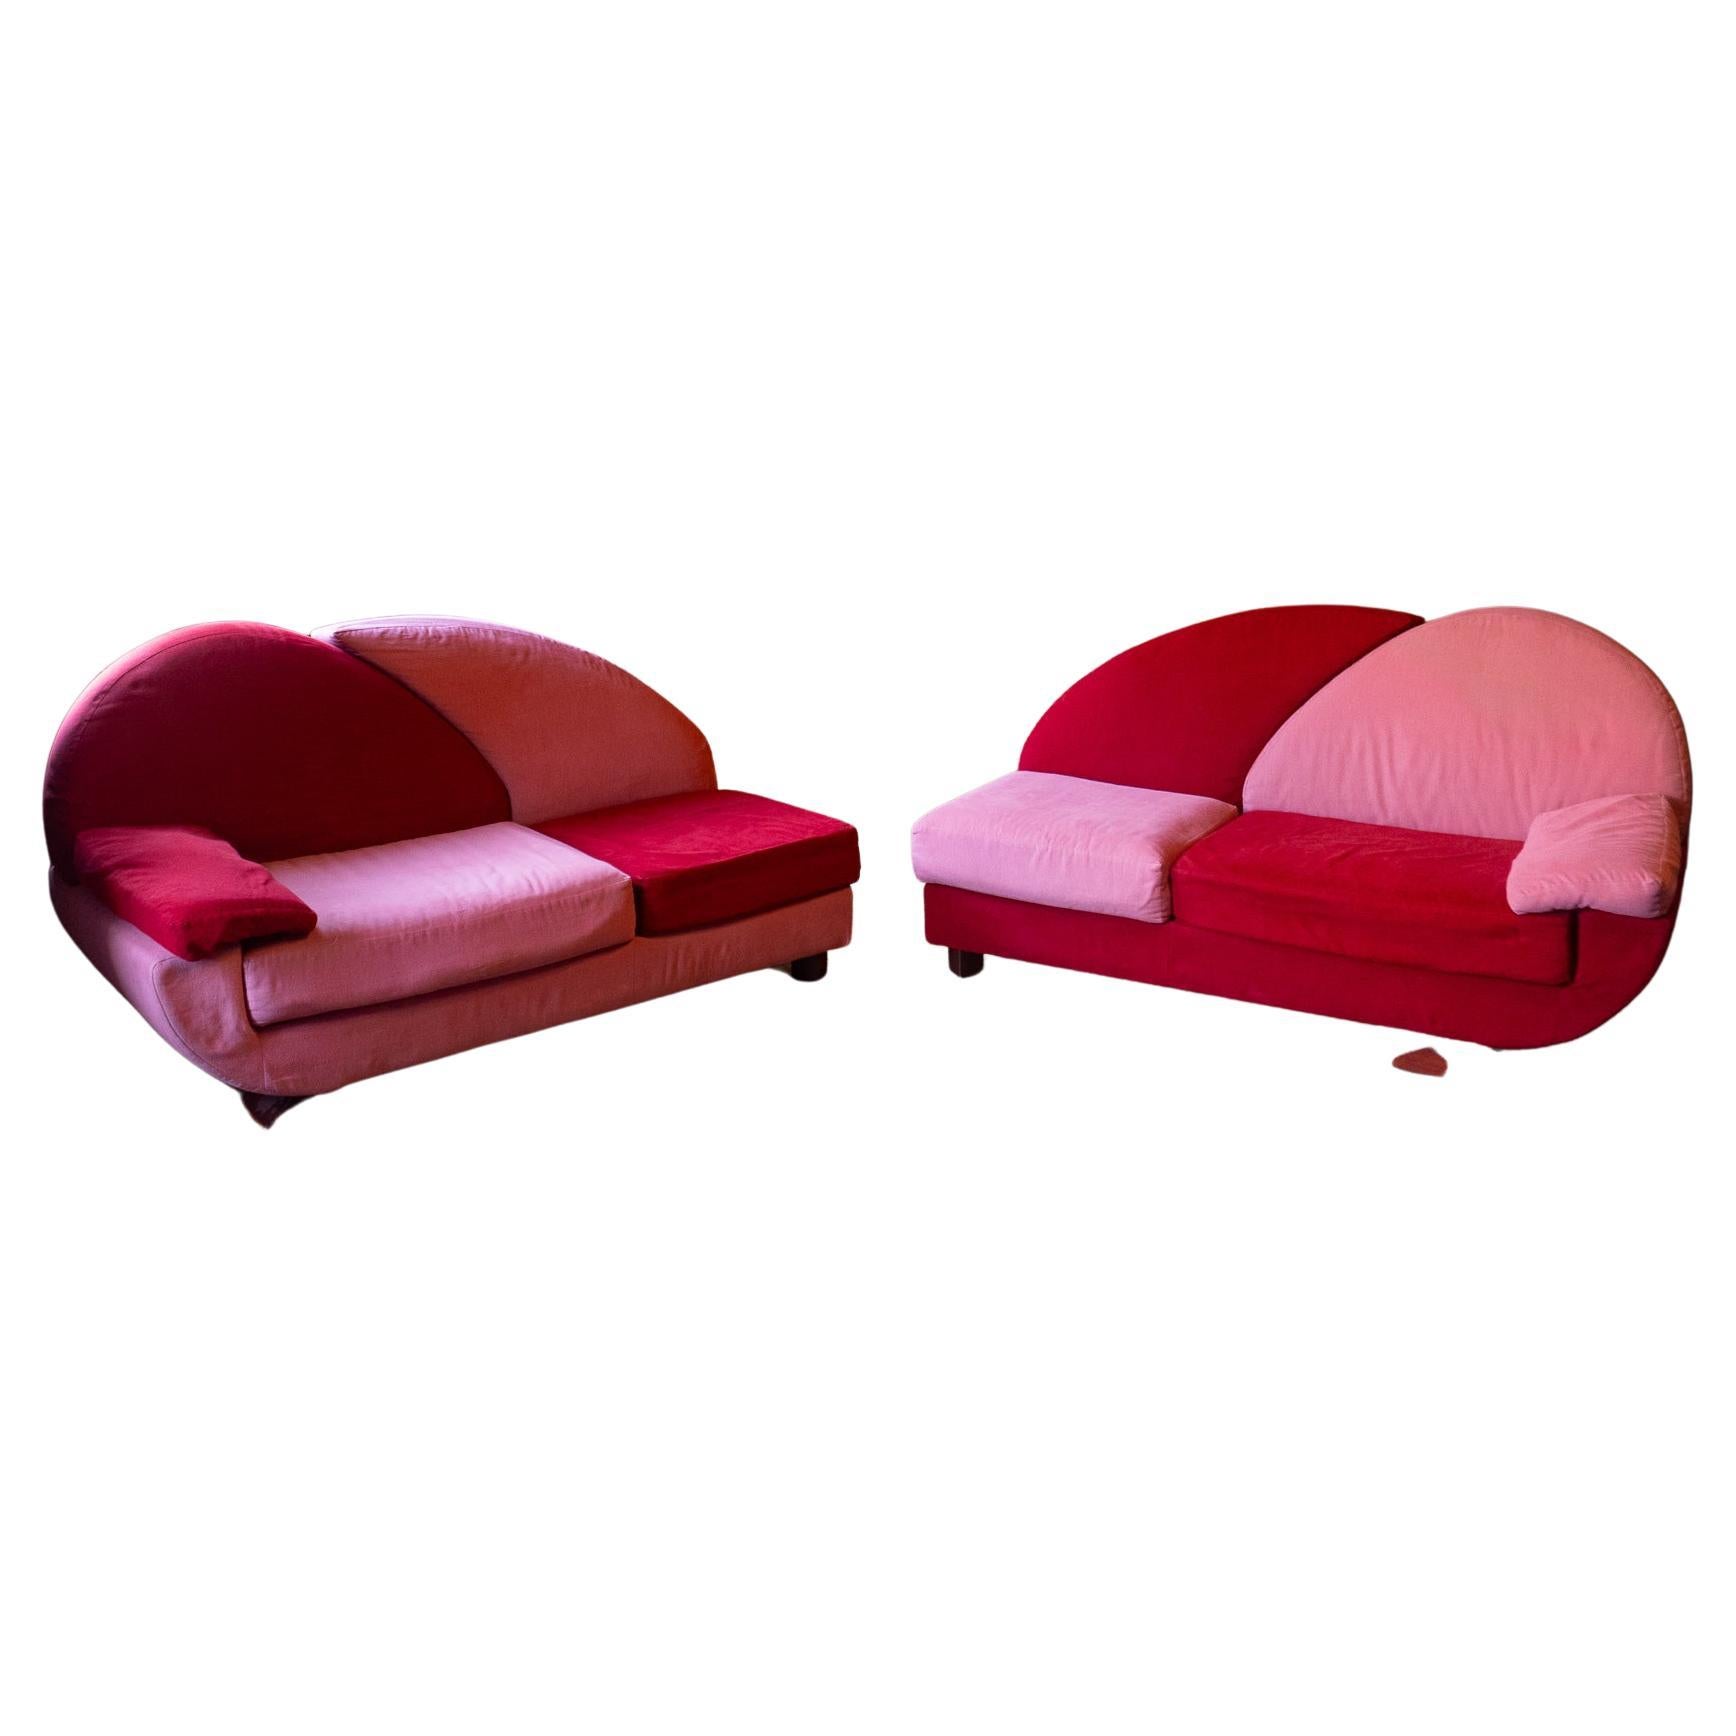 Post-modern pink and red Alcantara sofas, Italy 1980s

This rare set of pink and red postmodern sofas have a unique look: their brightly coloured cushions can be put together to form several colour combinations similar to a colourful geometric